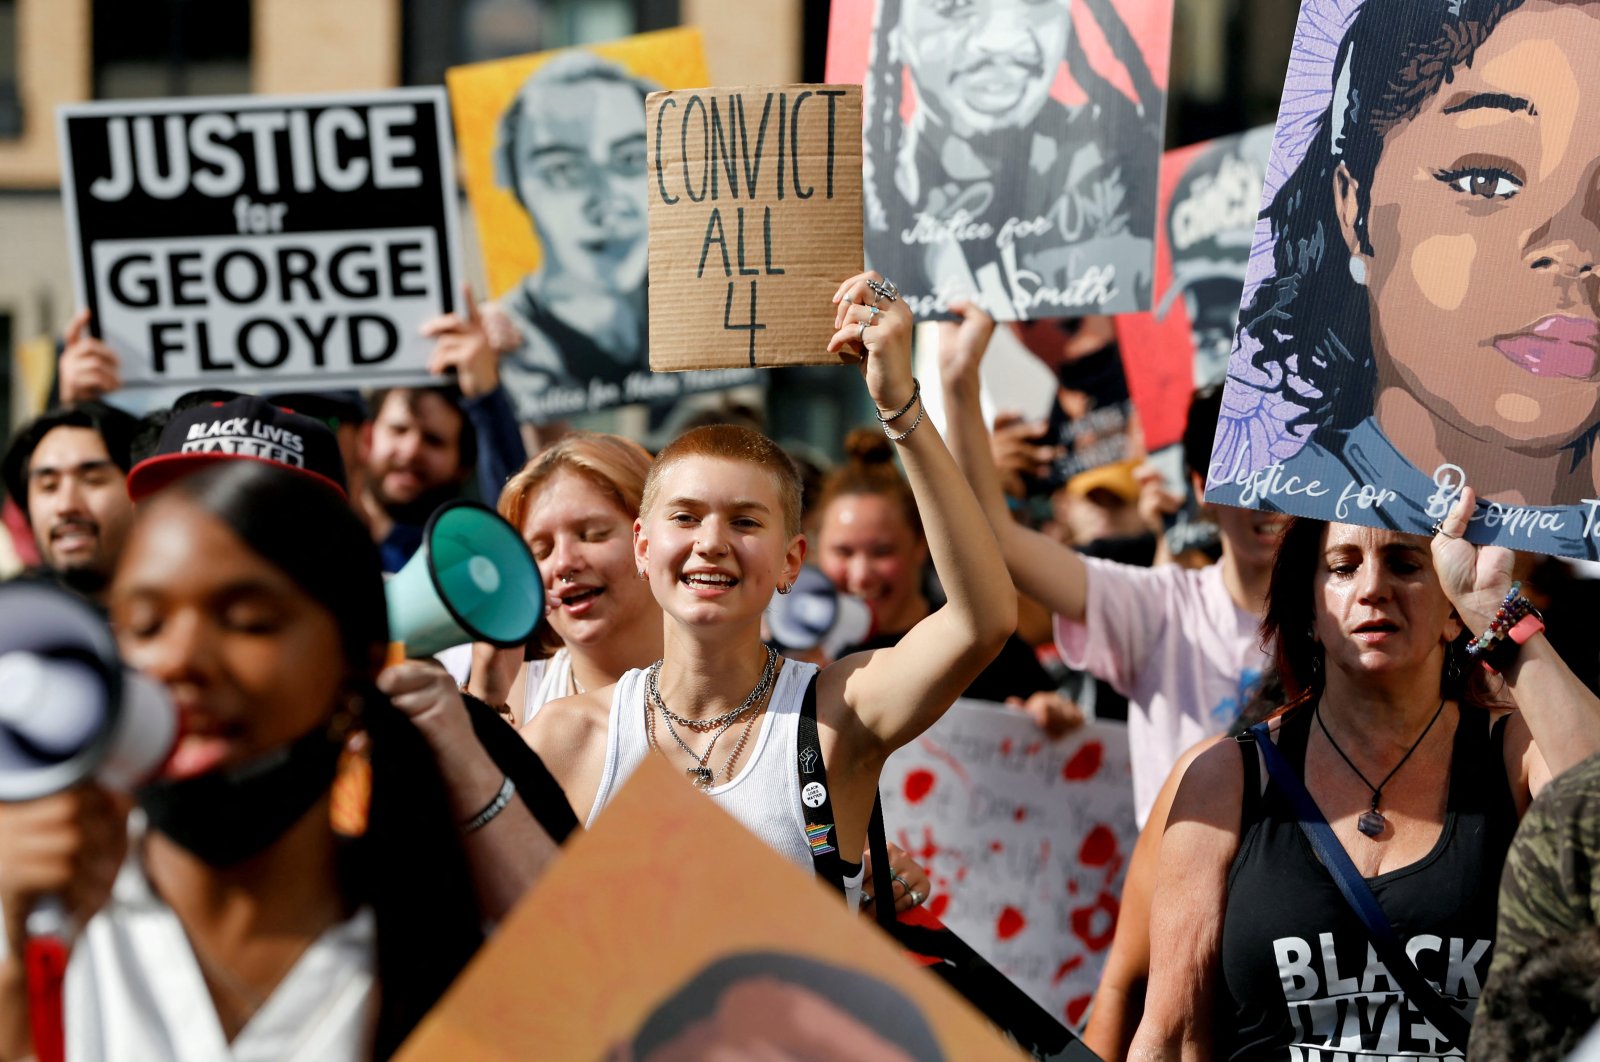 Protesters march during a brief rally after the sentencing of Derek Chauvin, the former Minneapolis police officer found guilty of killing George Floyd, a black man, Minneapolis, Minnesota, U.S., June 25, 2021. (Reuters Photo)